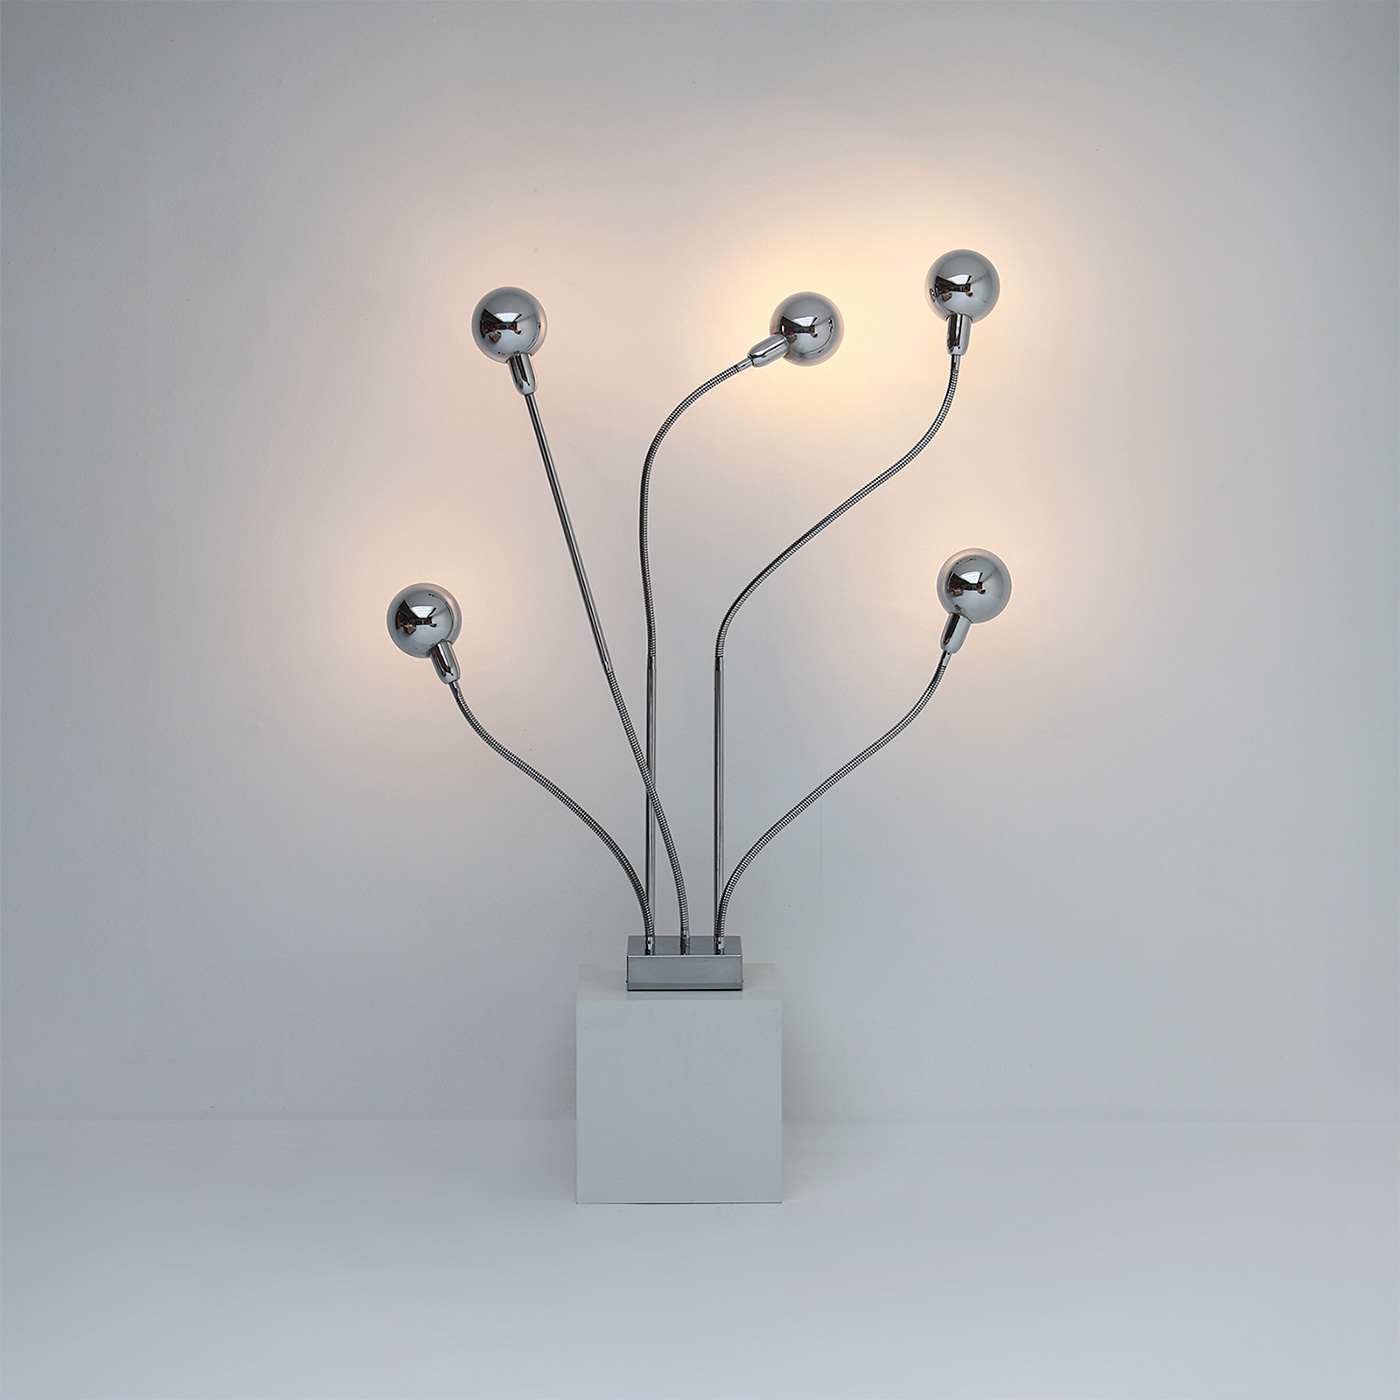 Pierre Folie Hydra floor lamp for Jacques Charpentier